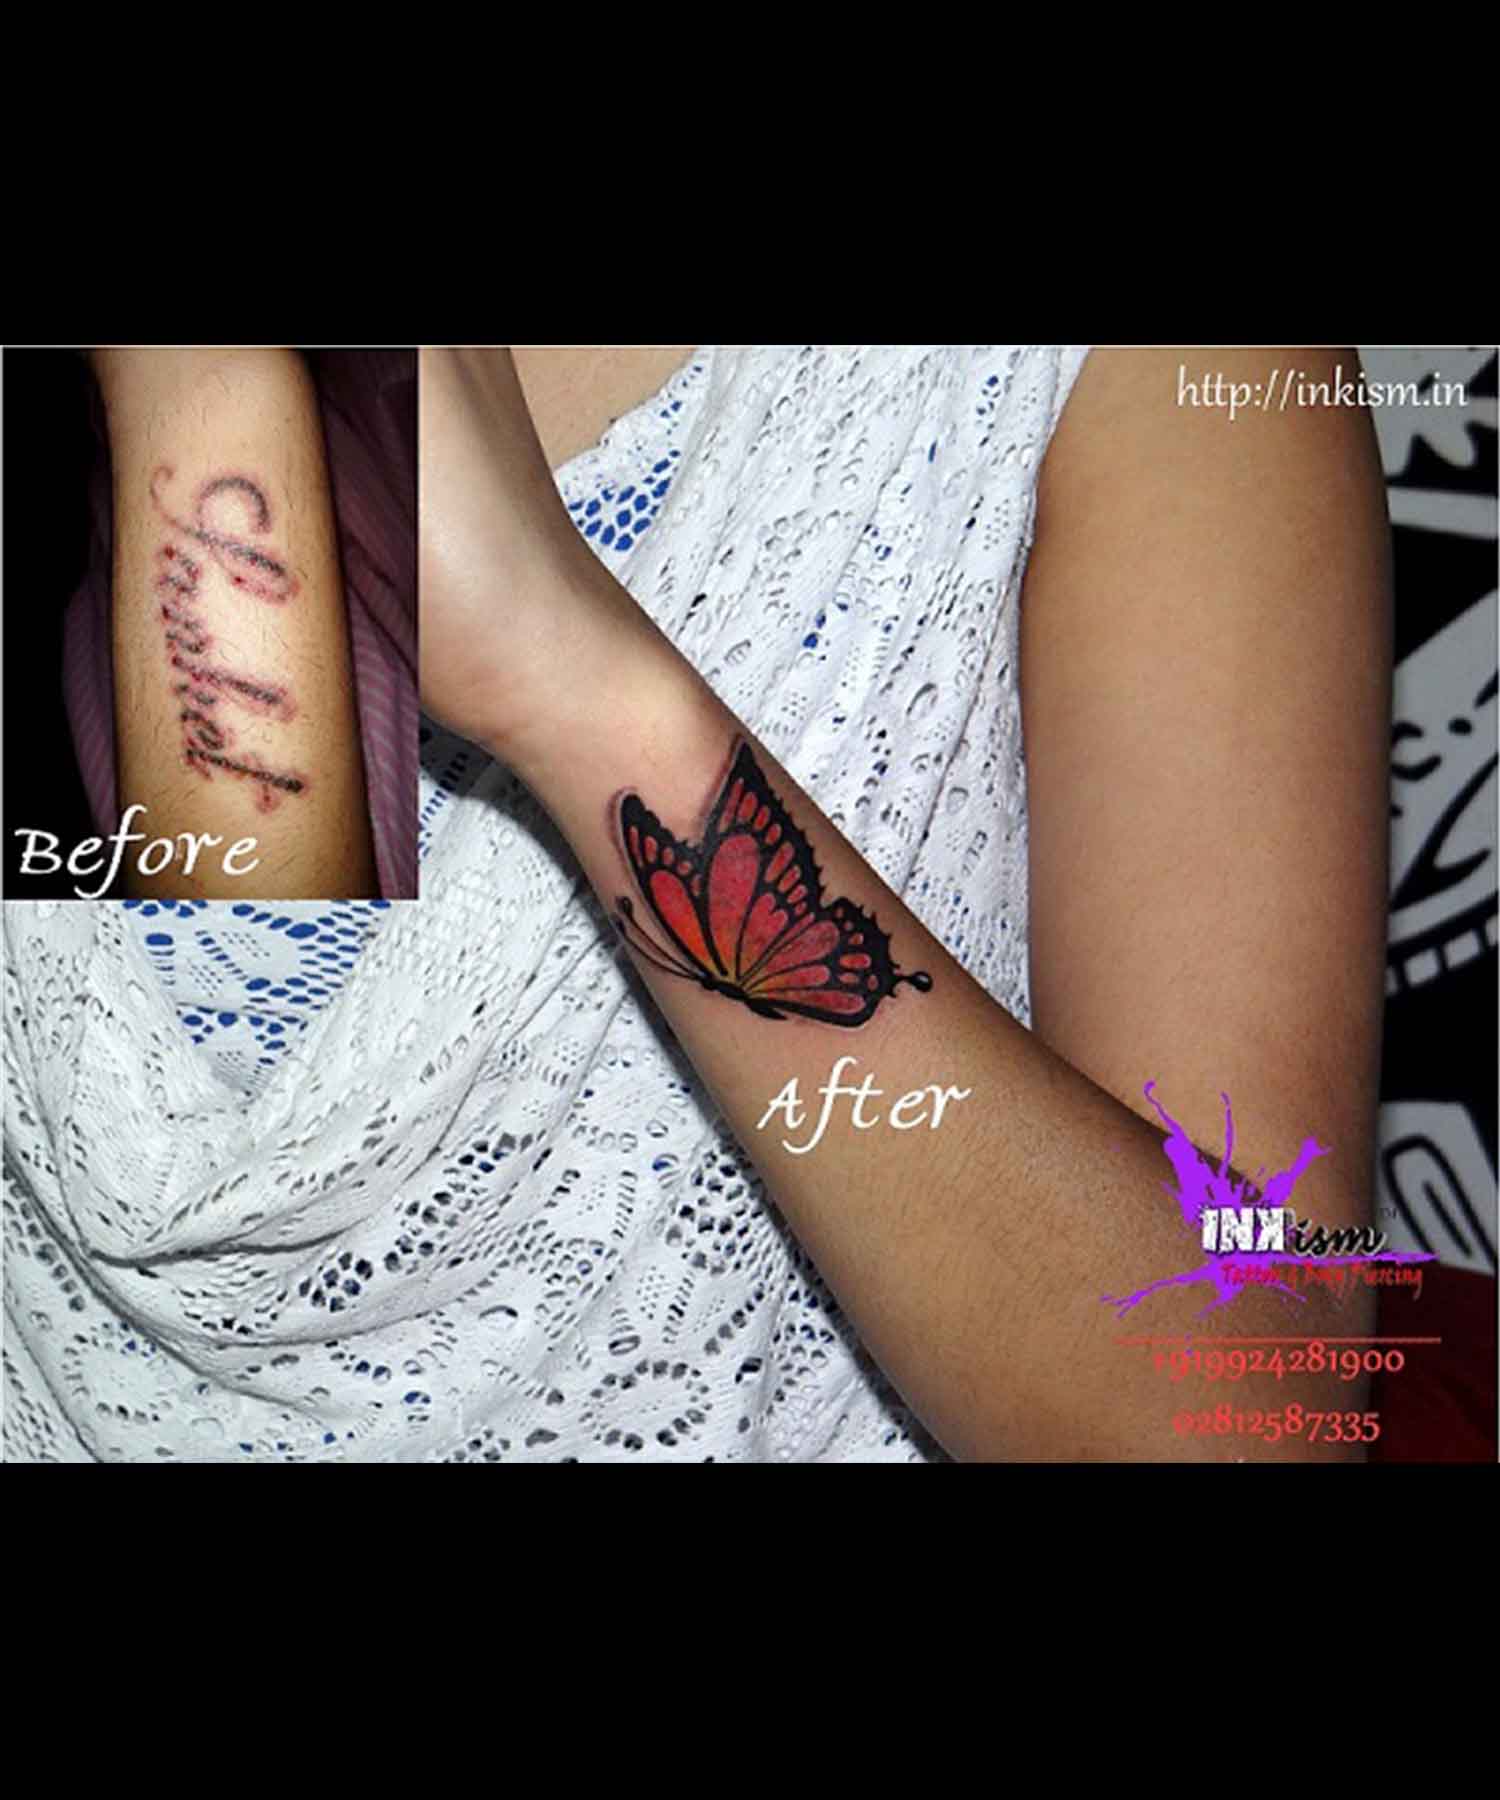 butterfly color tattoo, cover up tattoo, butterfly tattoo, inkism tattoo and piercing rajkot gujarat